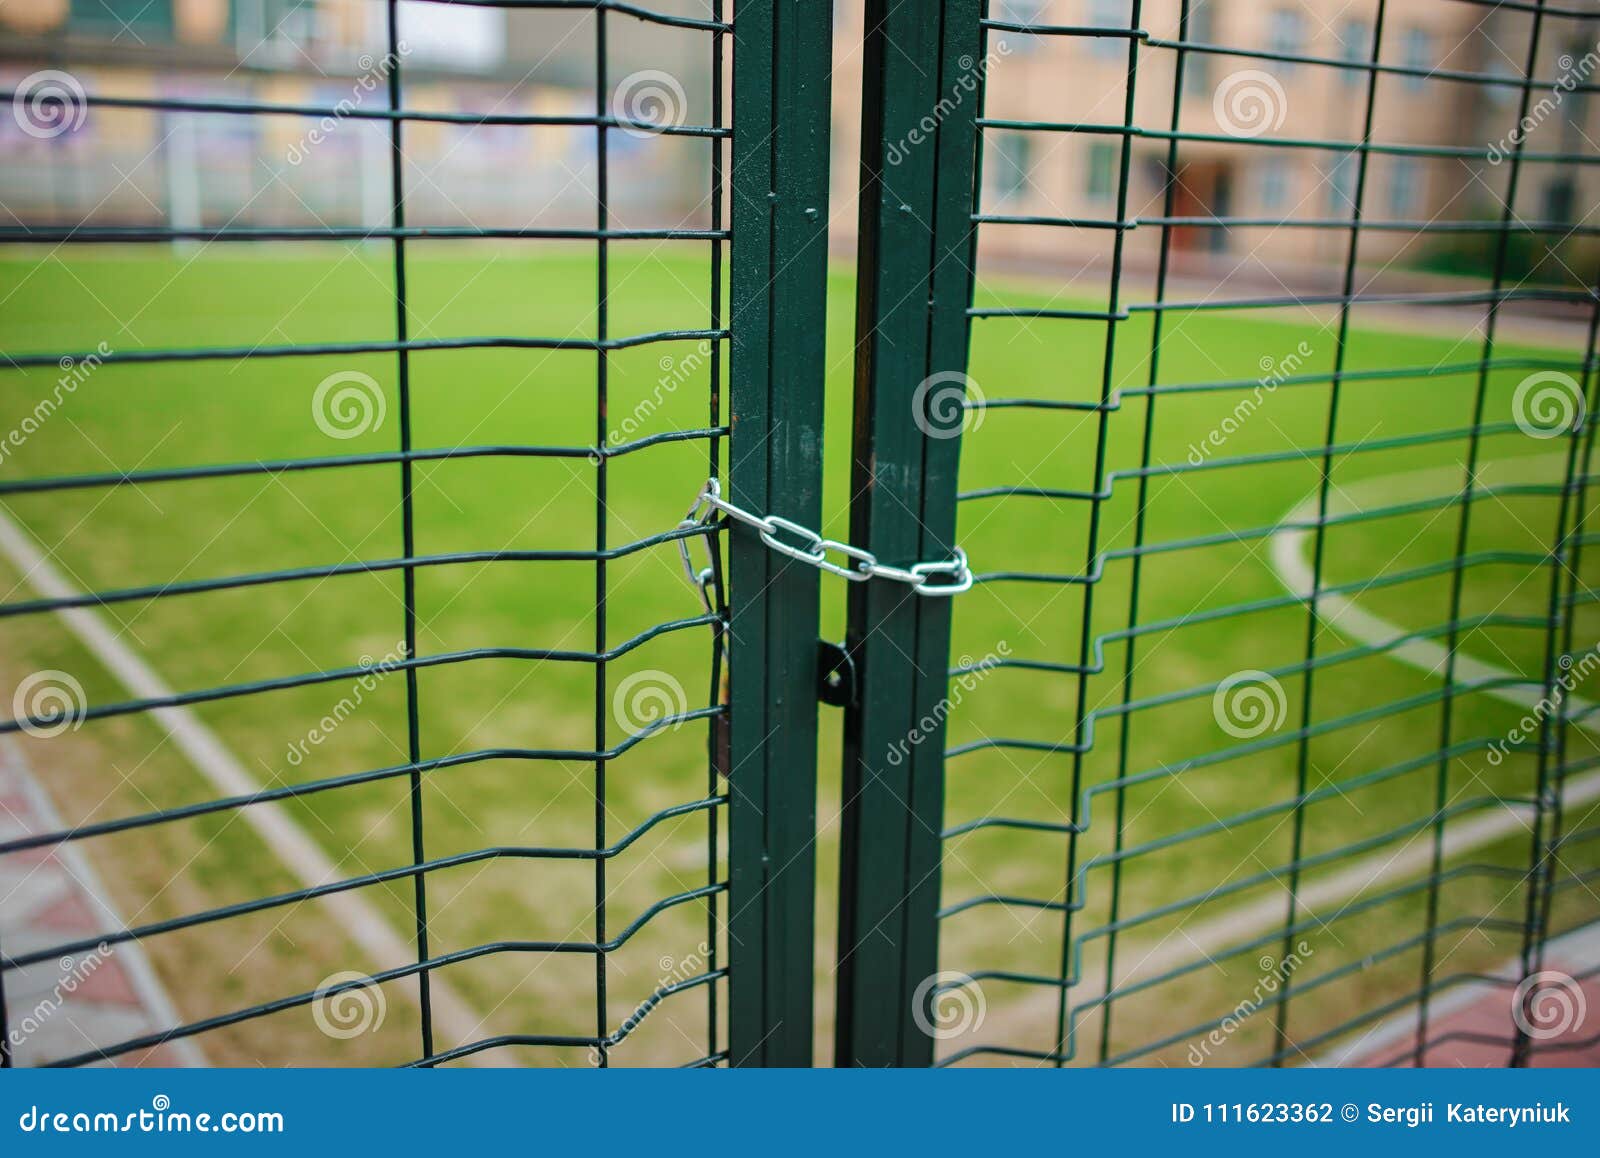 Close Up Metallic Net-shaped Green Fence That Closed And Wrapped By ...
